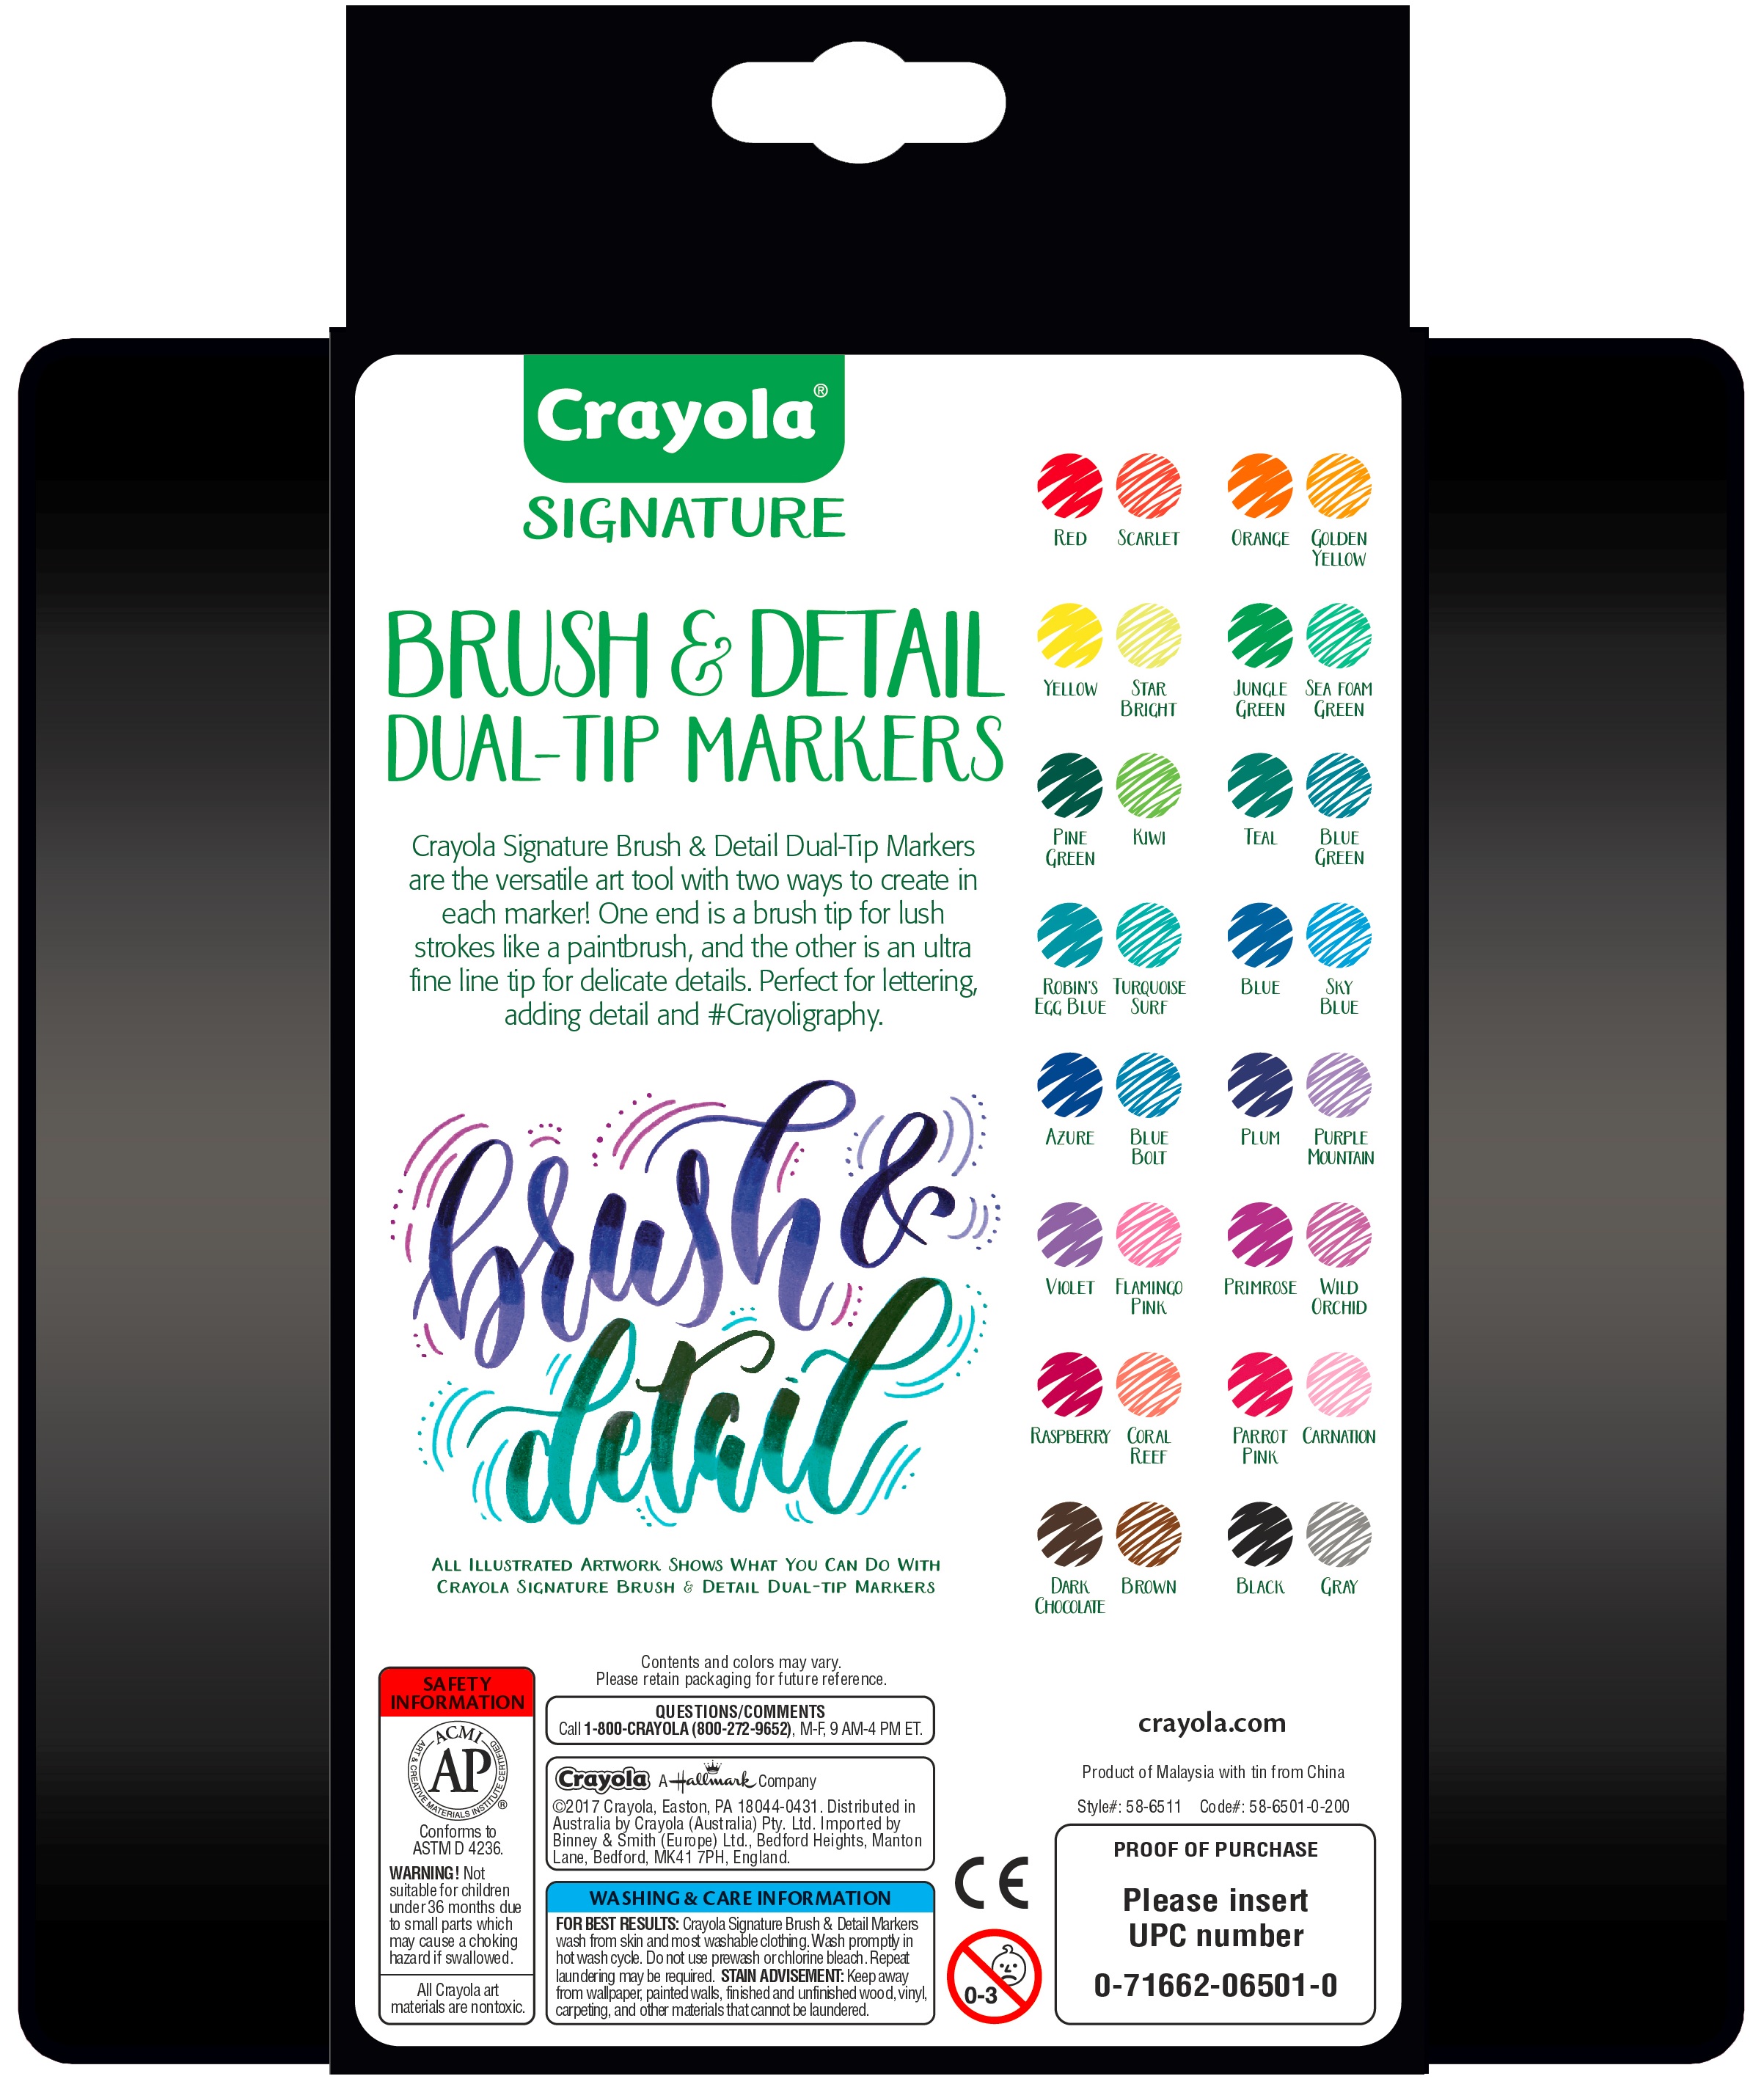 Crayola Signature Brush & Detail Dual-Tip Markers, 16 Ct, Art Supplies for Teens, Adult Coloring - image 3 of 5